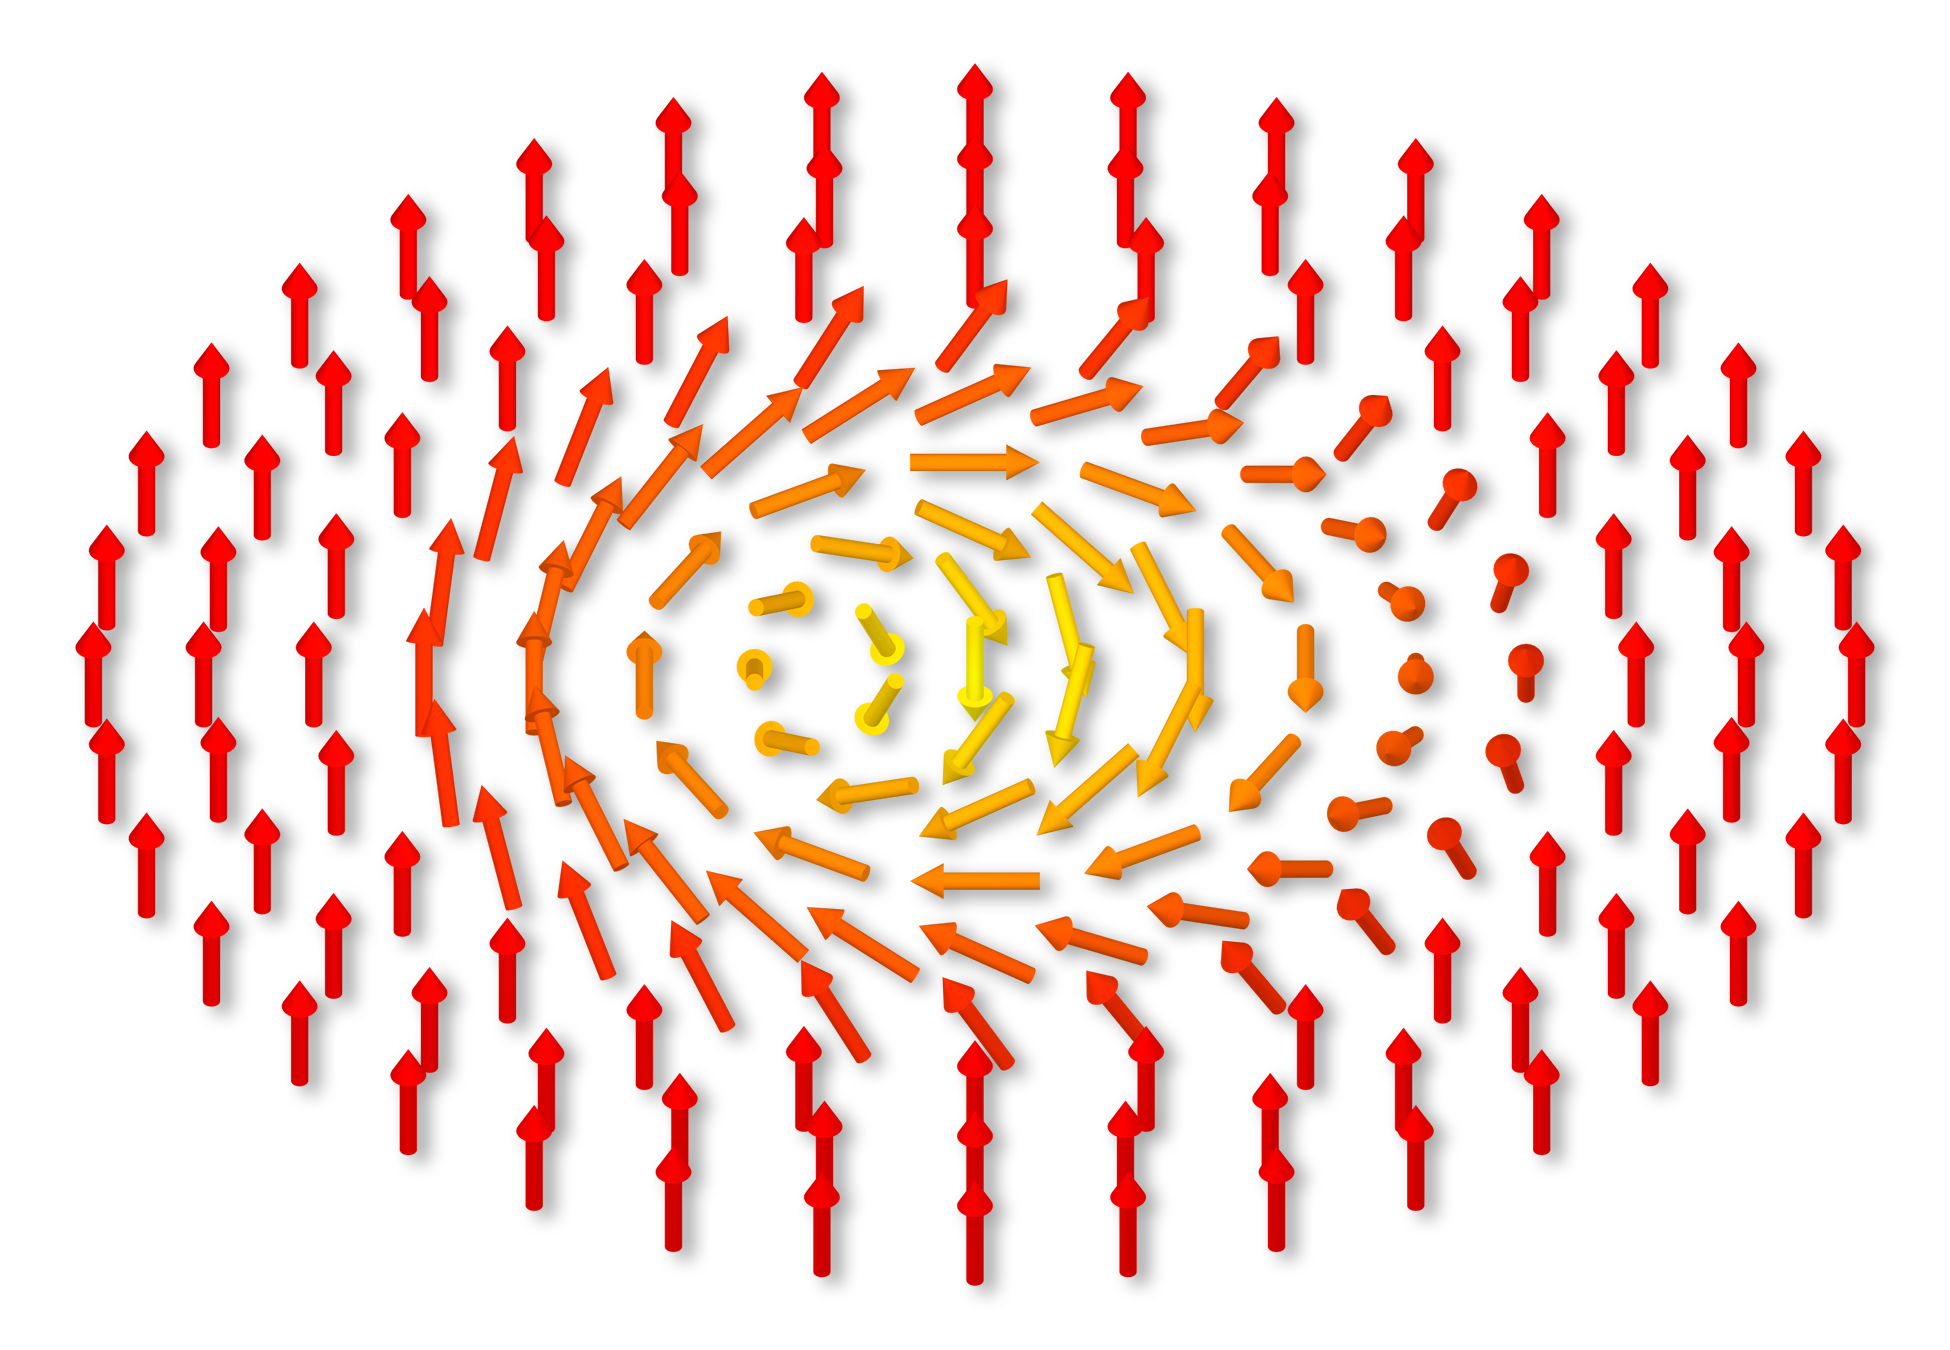 ILLUSTRATION - This graphic depicts the orientations of electron spins in a magnetic skyrmion that is 100 nanometers in diameter and composed of about 8 million atoms. The spin of the central atom points down (yellow), while those of the surrounding atoms change slowly, eventually flipping to the “up” orientation at the circumference. (Greg Stewart/SLAC National Accelerator Laboratory)